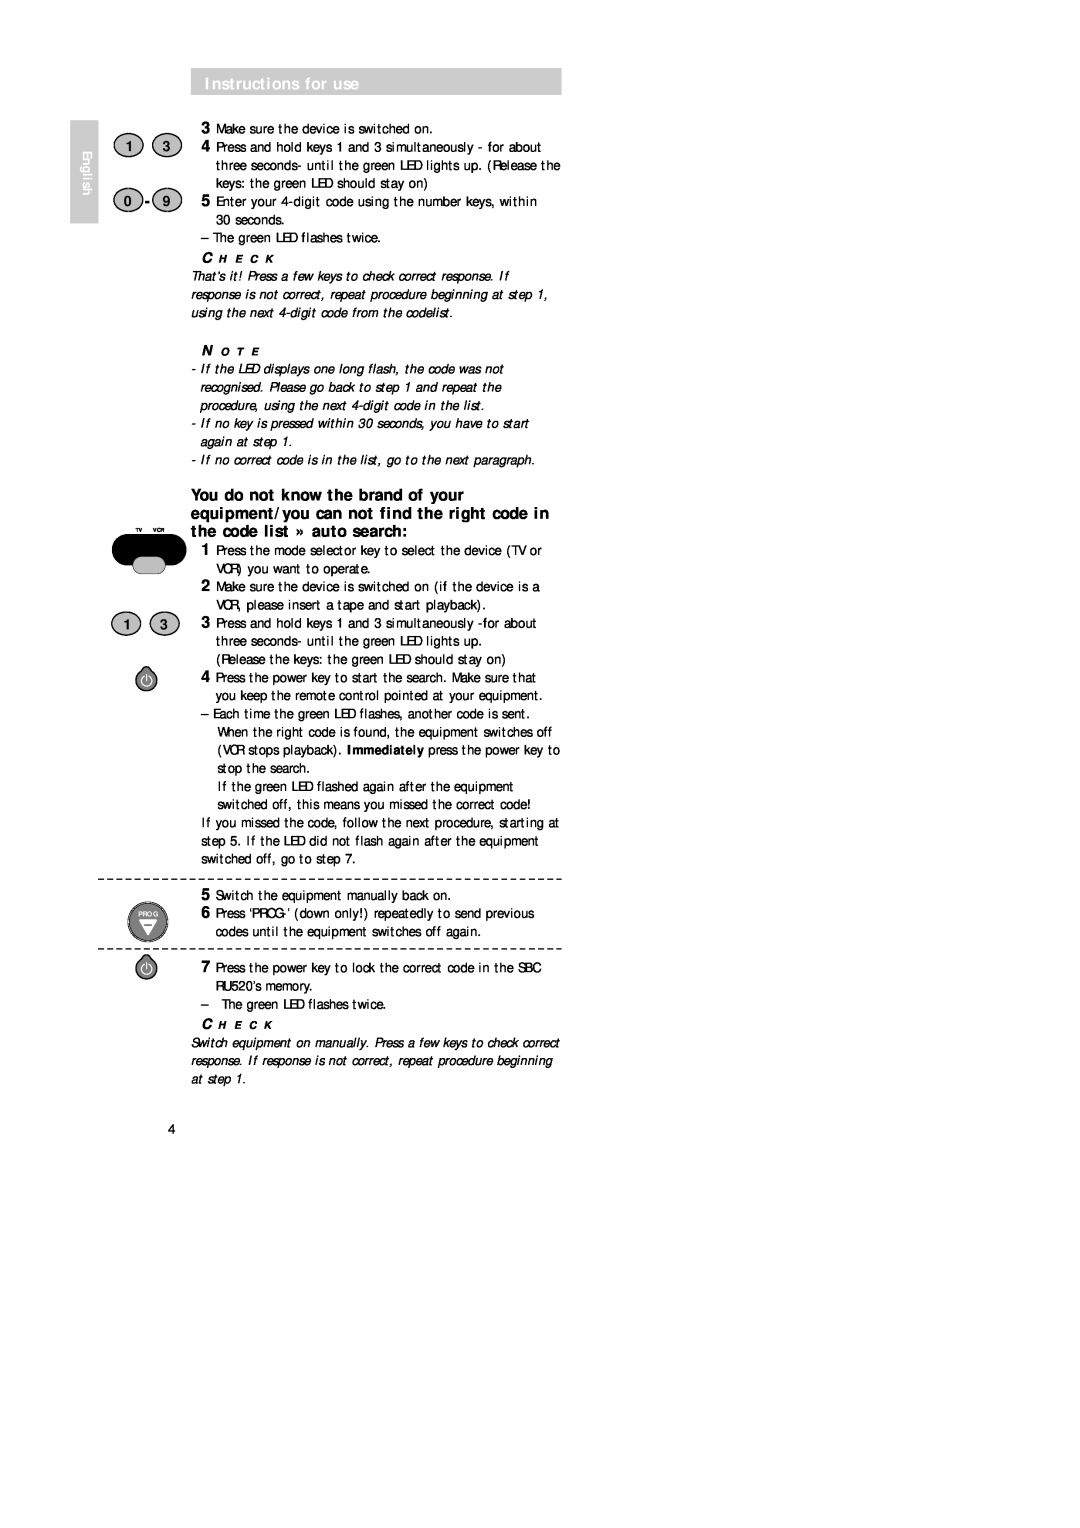 Philips SBC RU 520 manual Instructions for use, English, If no correct code is in the list, go to the next paragraph 